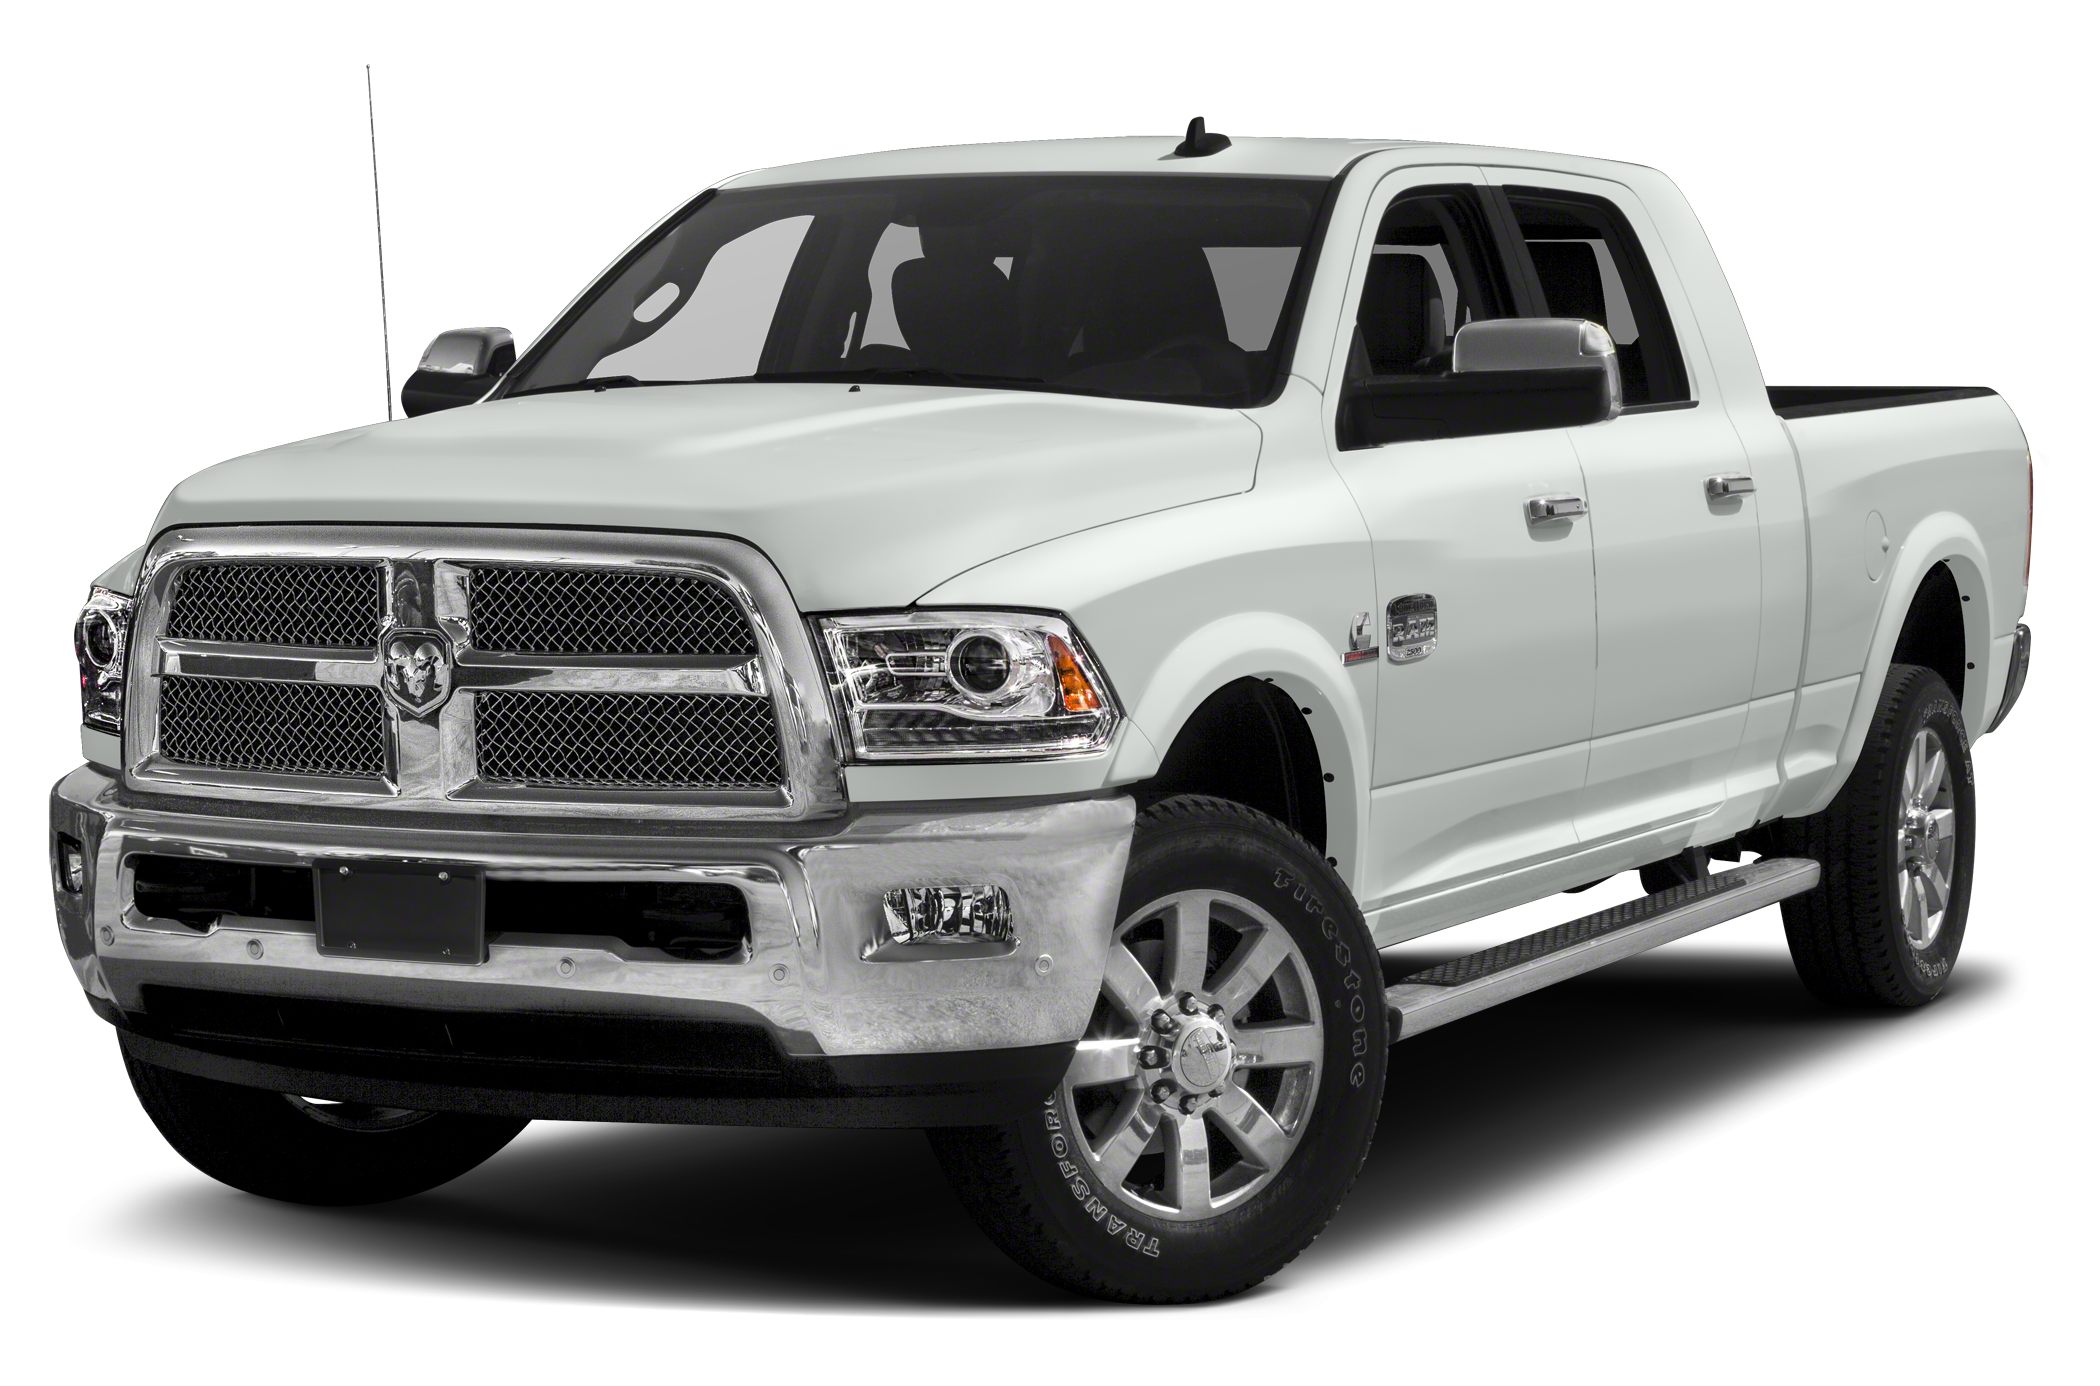 2018 Ram 2500 Longhorn 4x4 Mega Cab 160 5 In Wb Specs And Prices